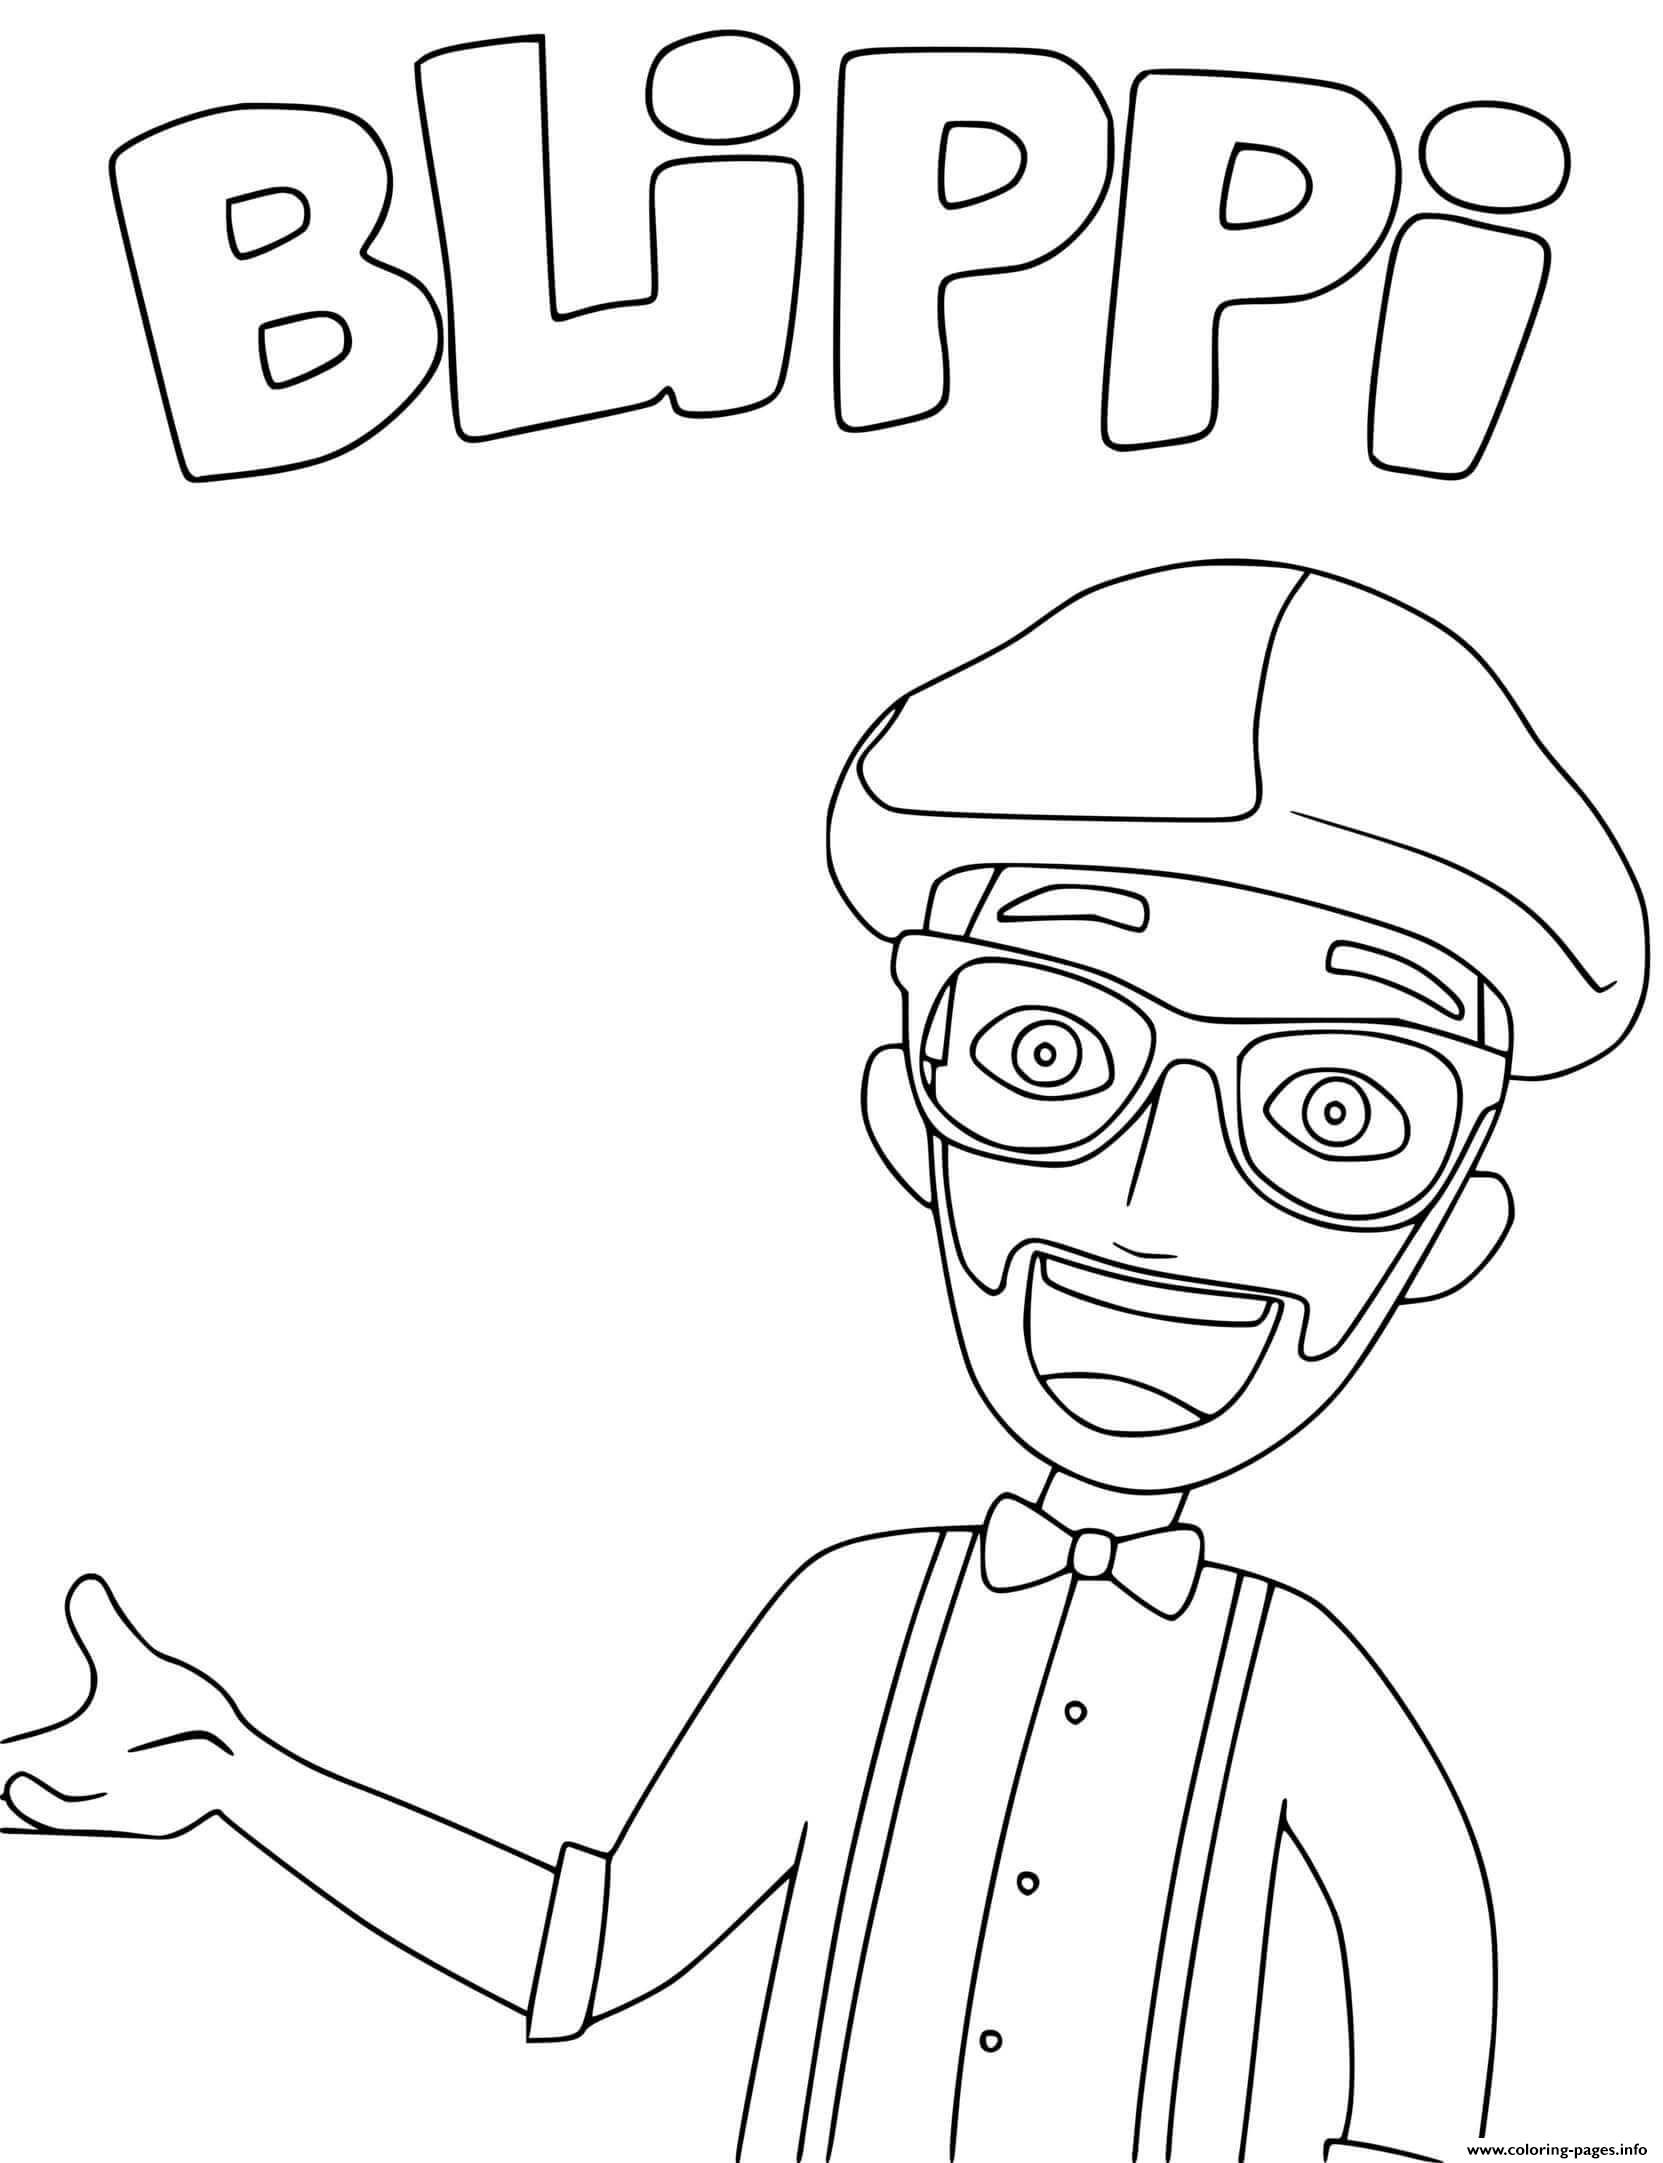 Printable Blippi Coloring Pages Customize and Print